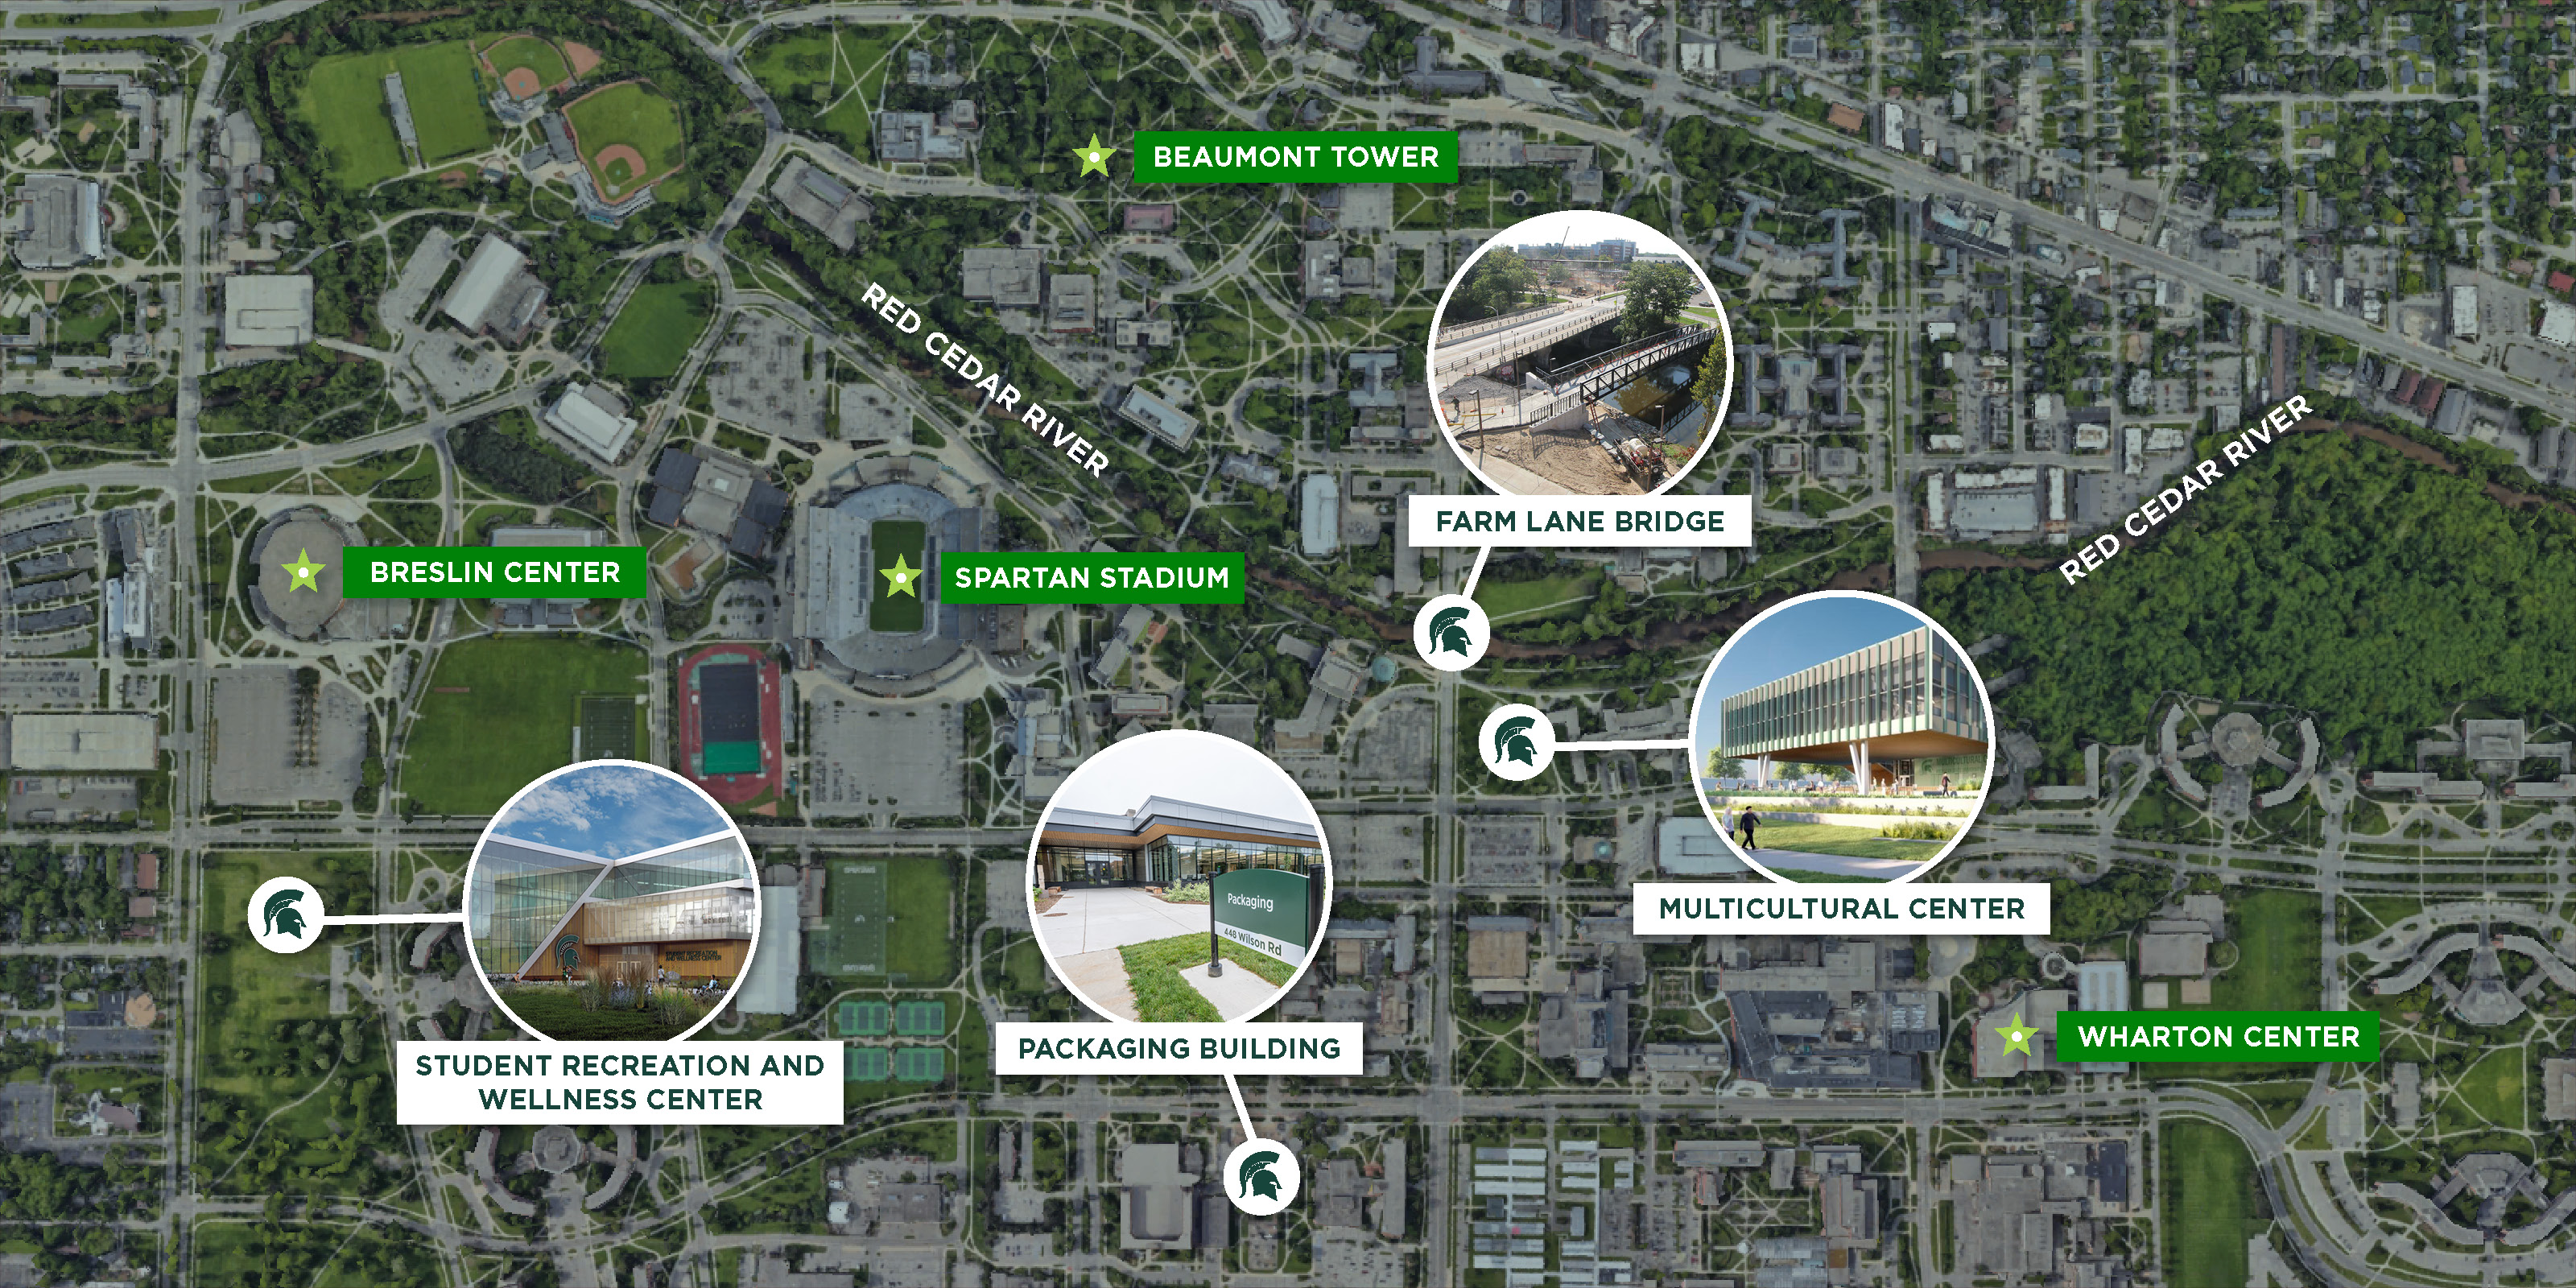 Google Earth image of MSU’s campus. White text indicates Red Cedar River. Four locations are marked with a green star: Breslin Center, Spartan Stadium, Beaumont Tower, Wharton Center. Four locations are marked with a white dot connected to a circle containing photos or building renderings.